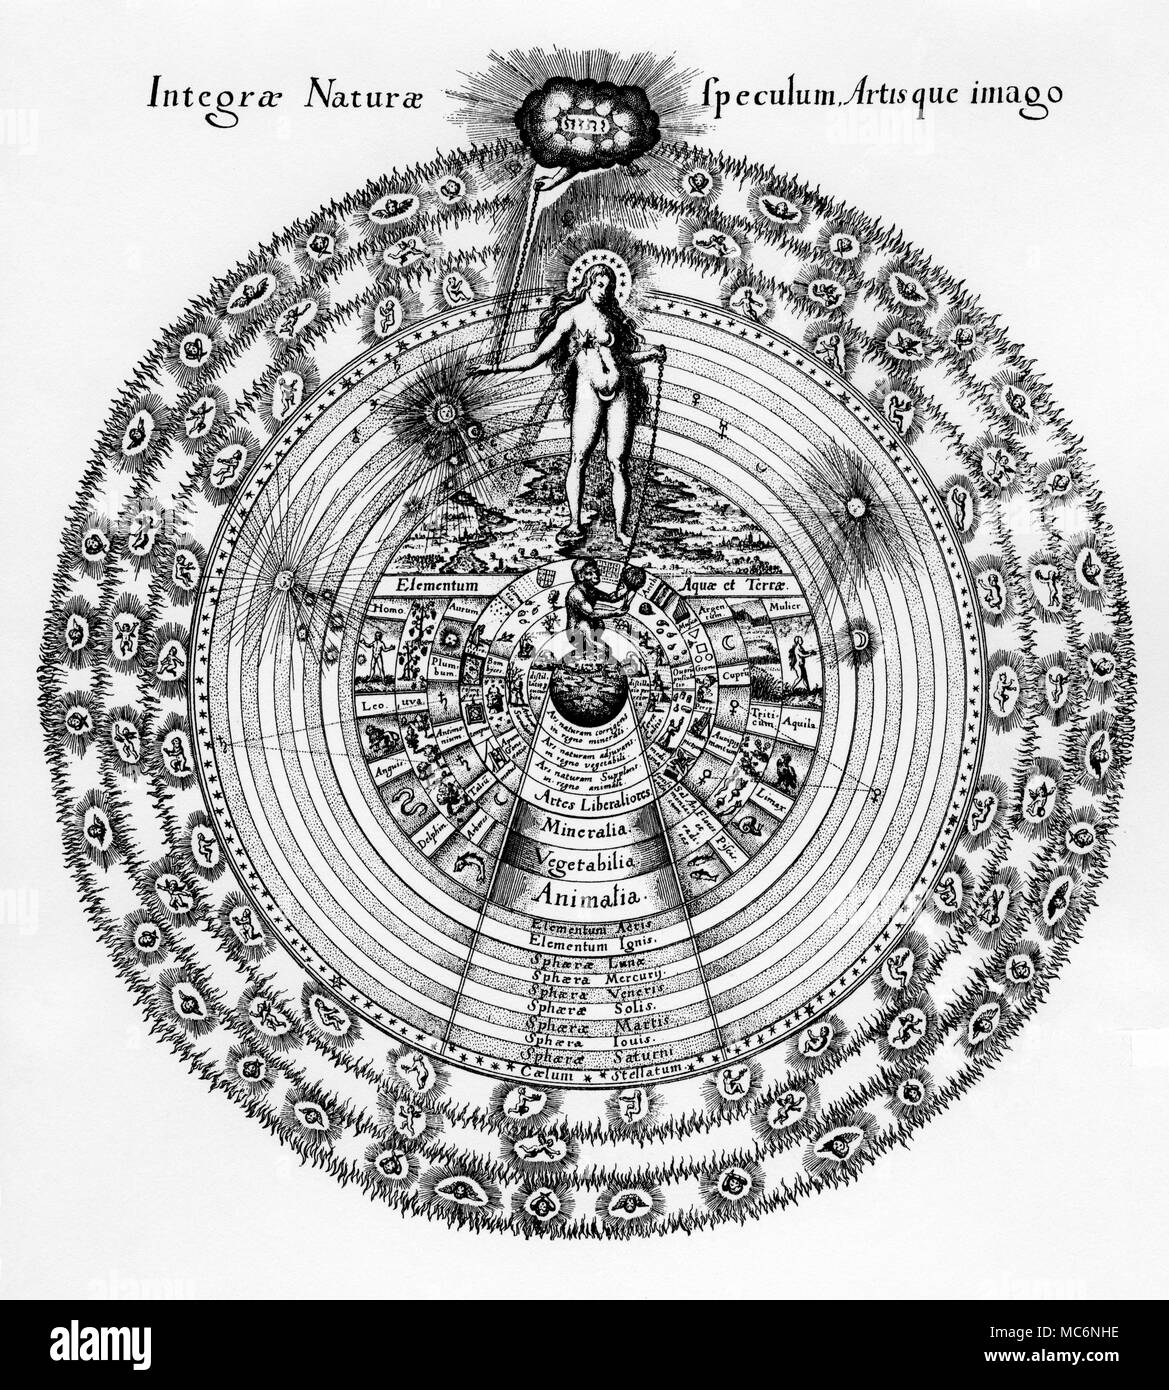 The Cosmic system, over-looked by the Anima Mundi, who is linked with the Godhead [Jehova] and the Ape, who sits on the symbol of the earth. The concentrics represent the Four Worlds of the Cabbalists. Stock Photo